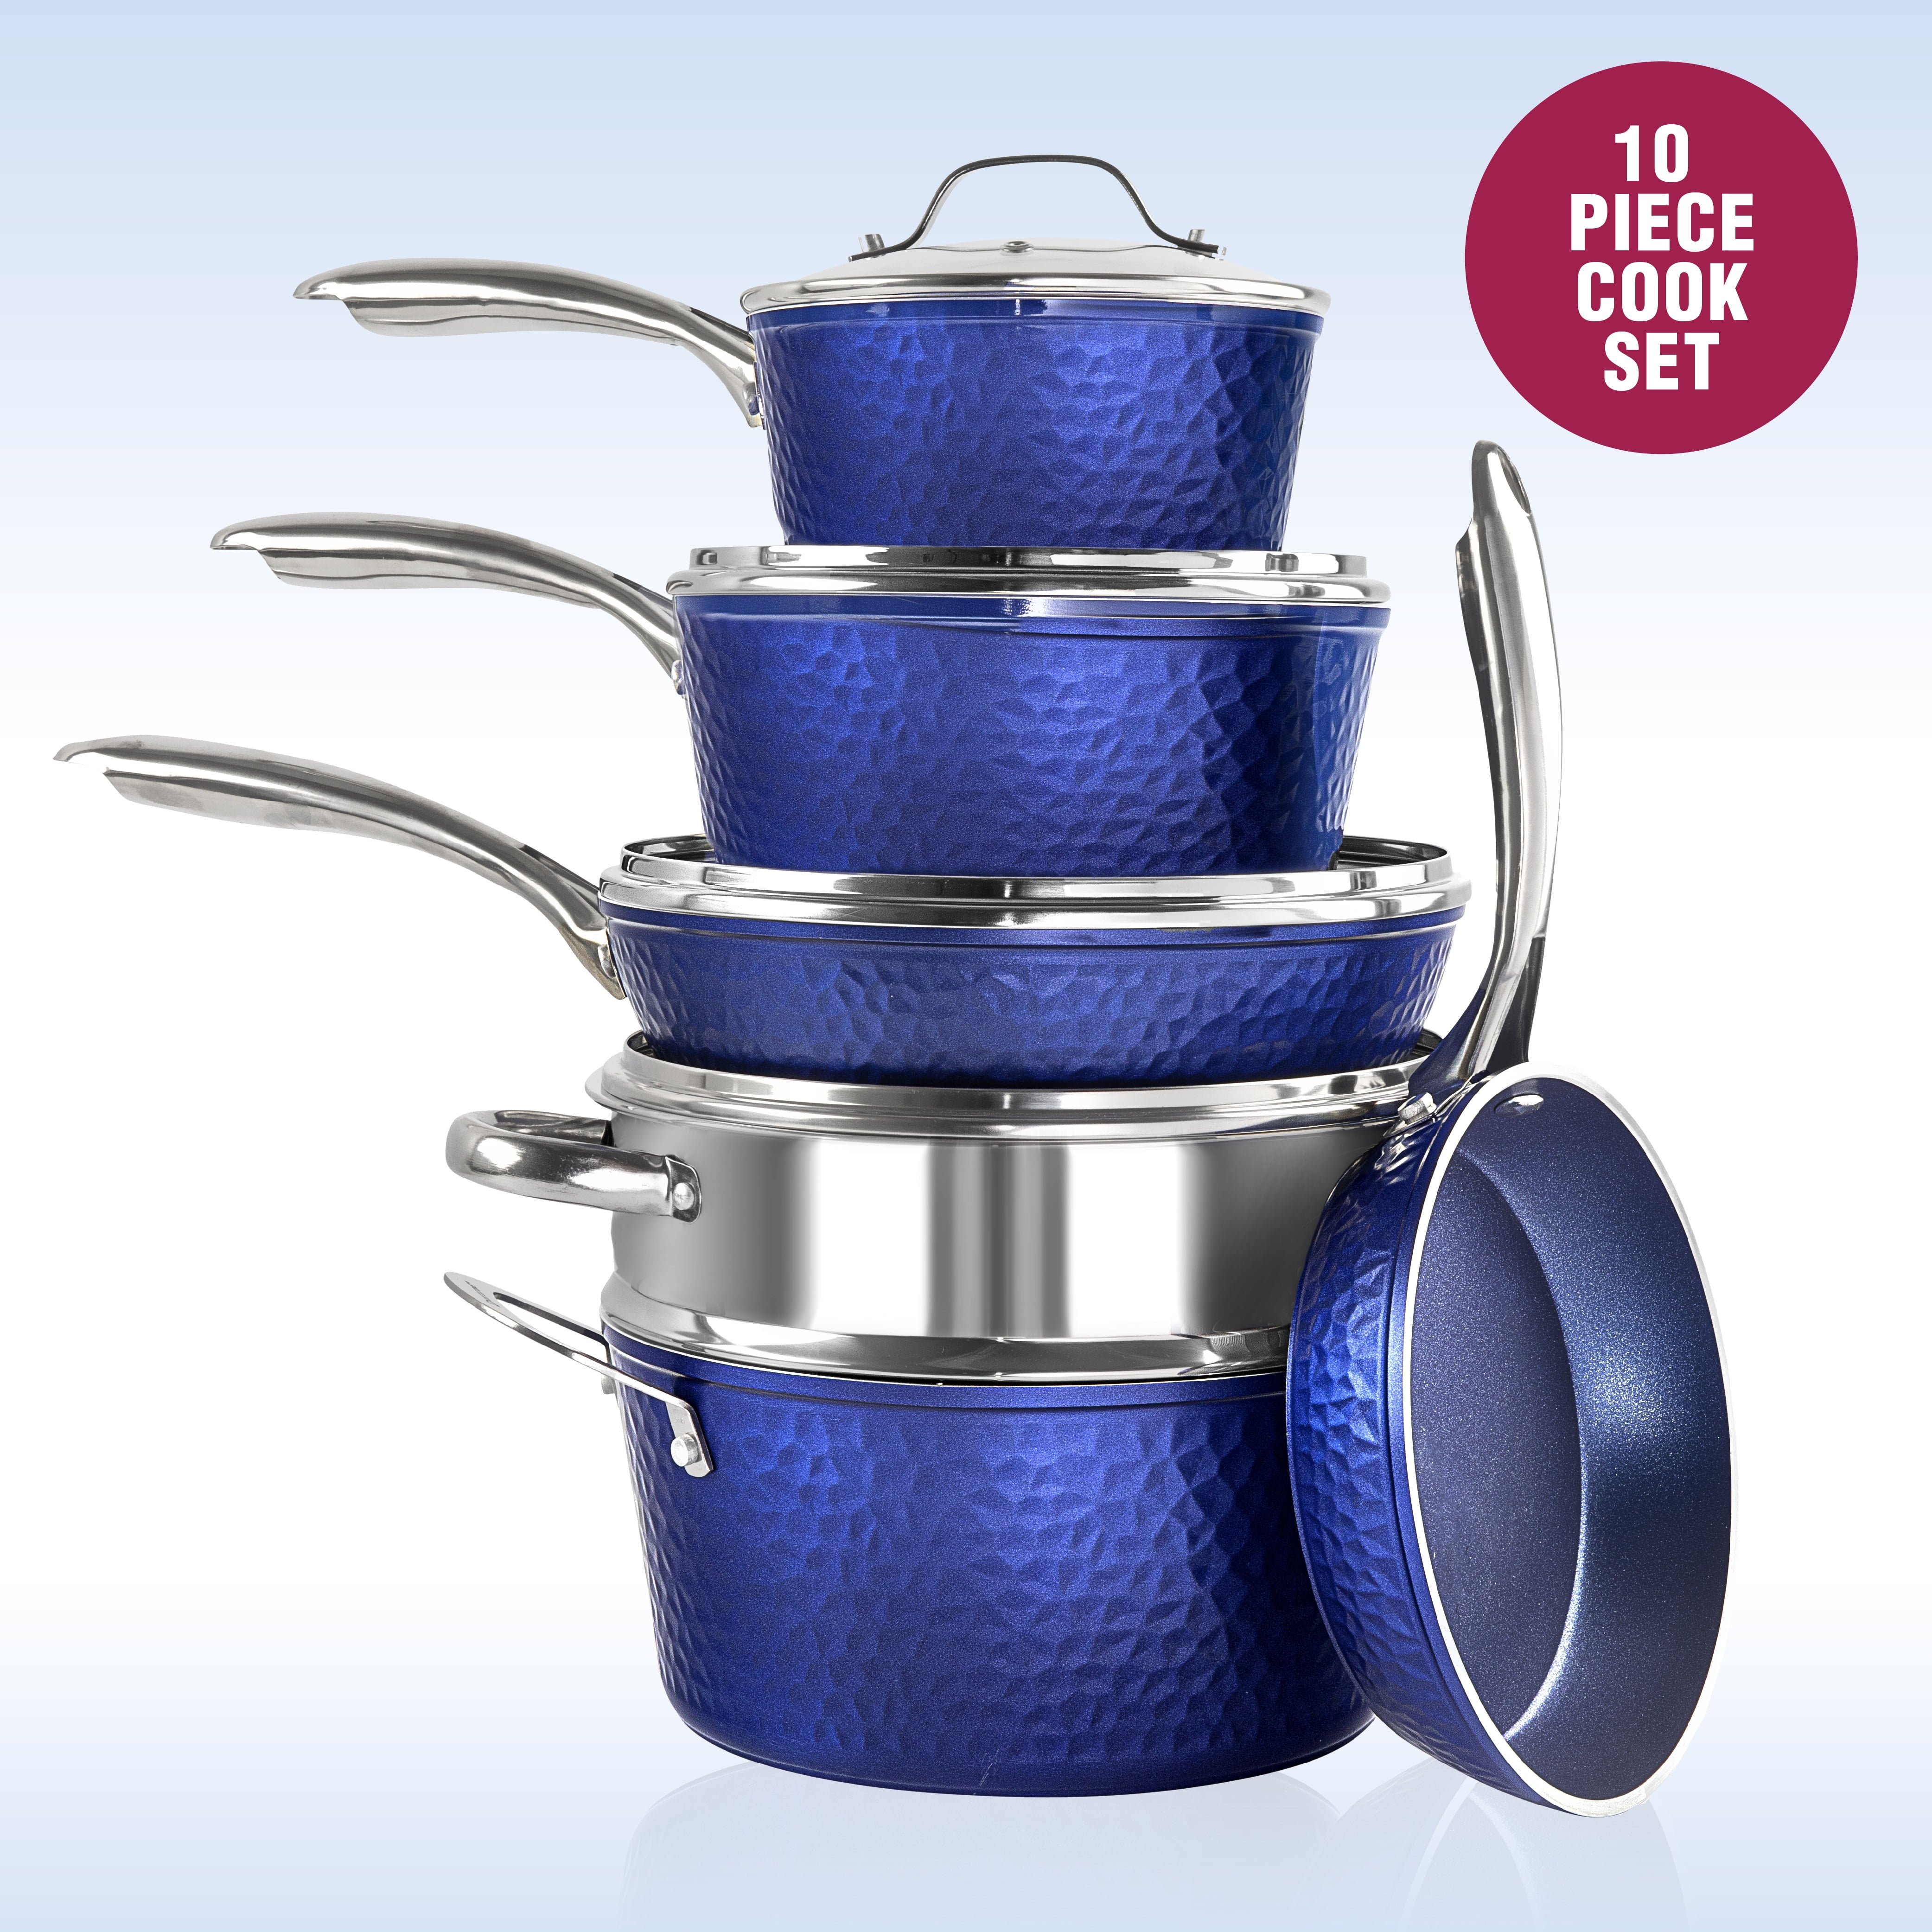 Dare to go blue: our top 10 kitchen accessories